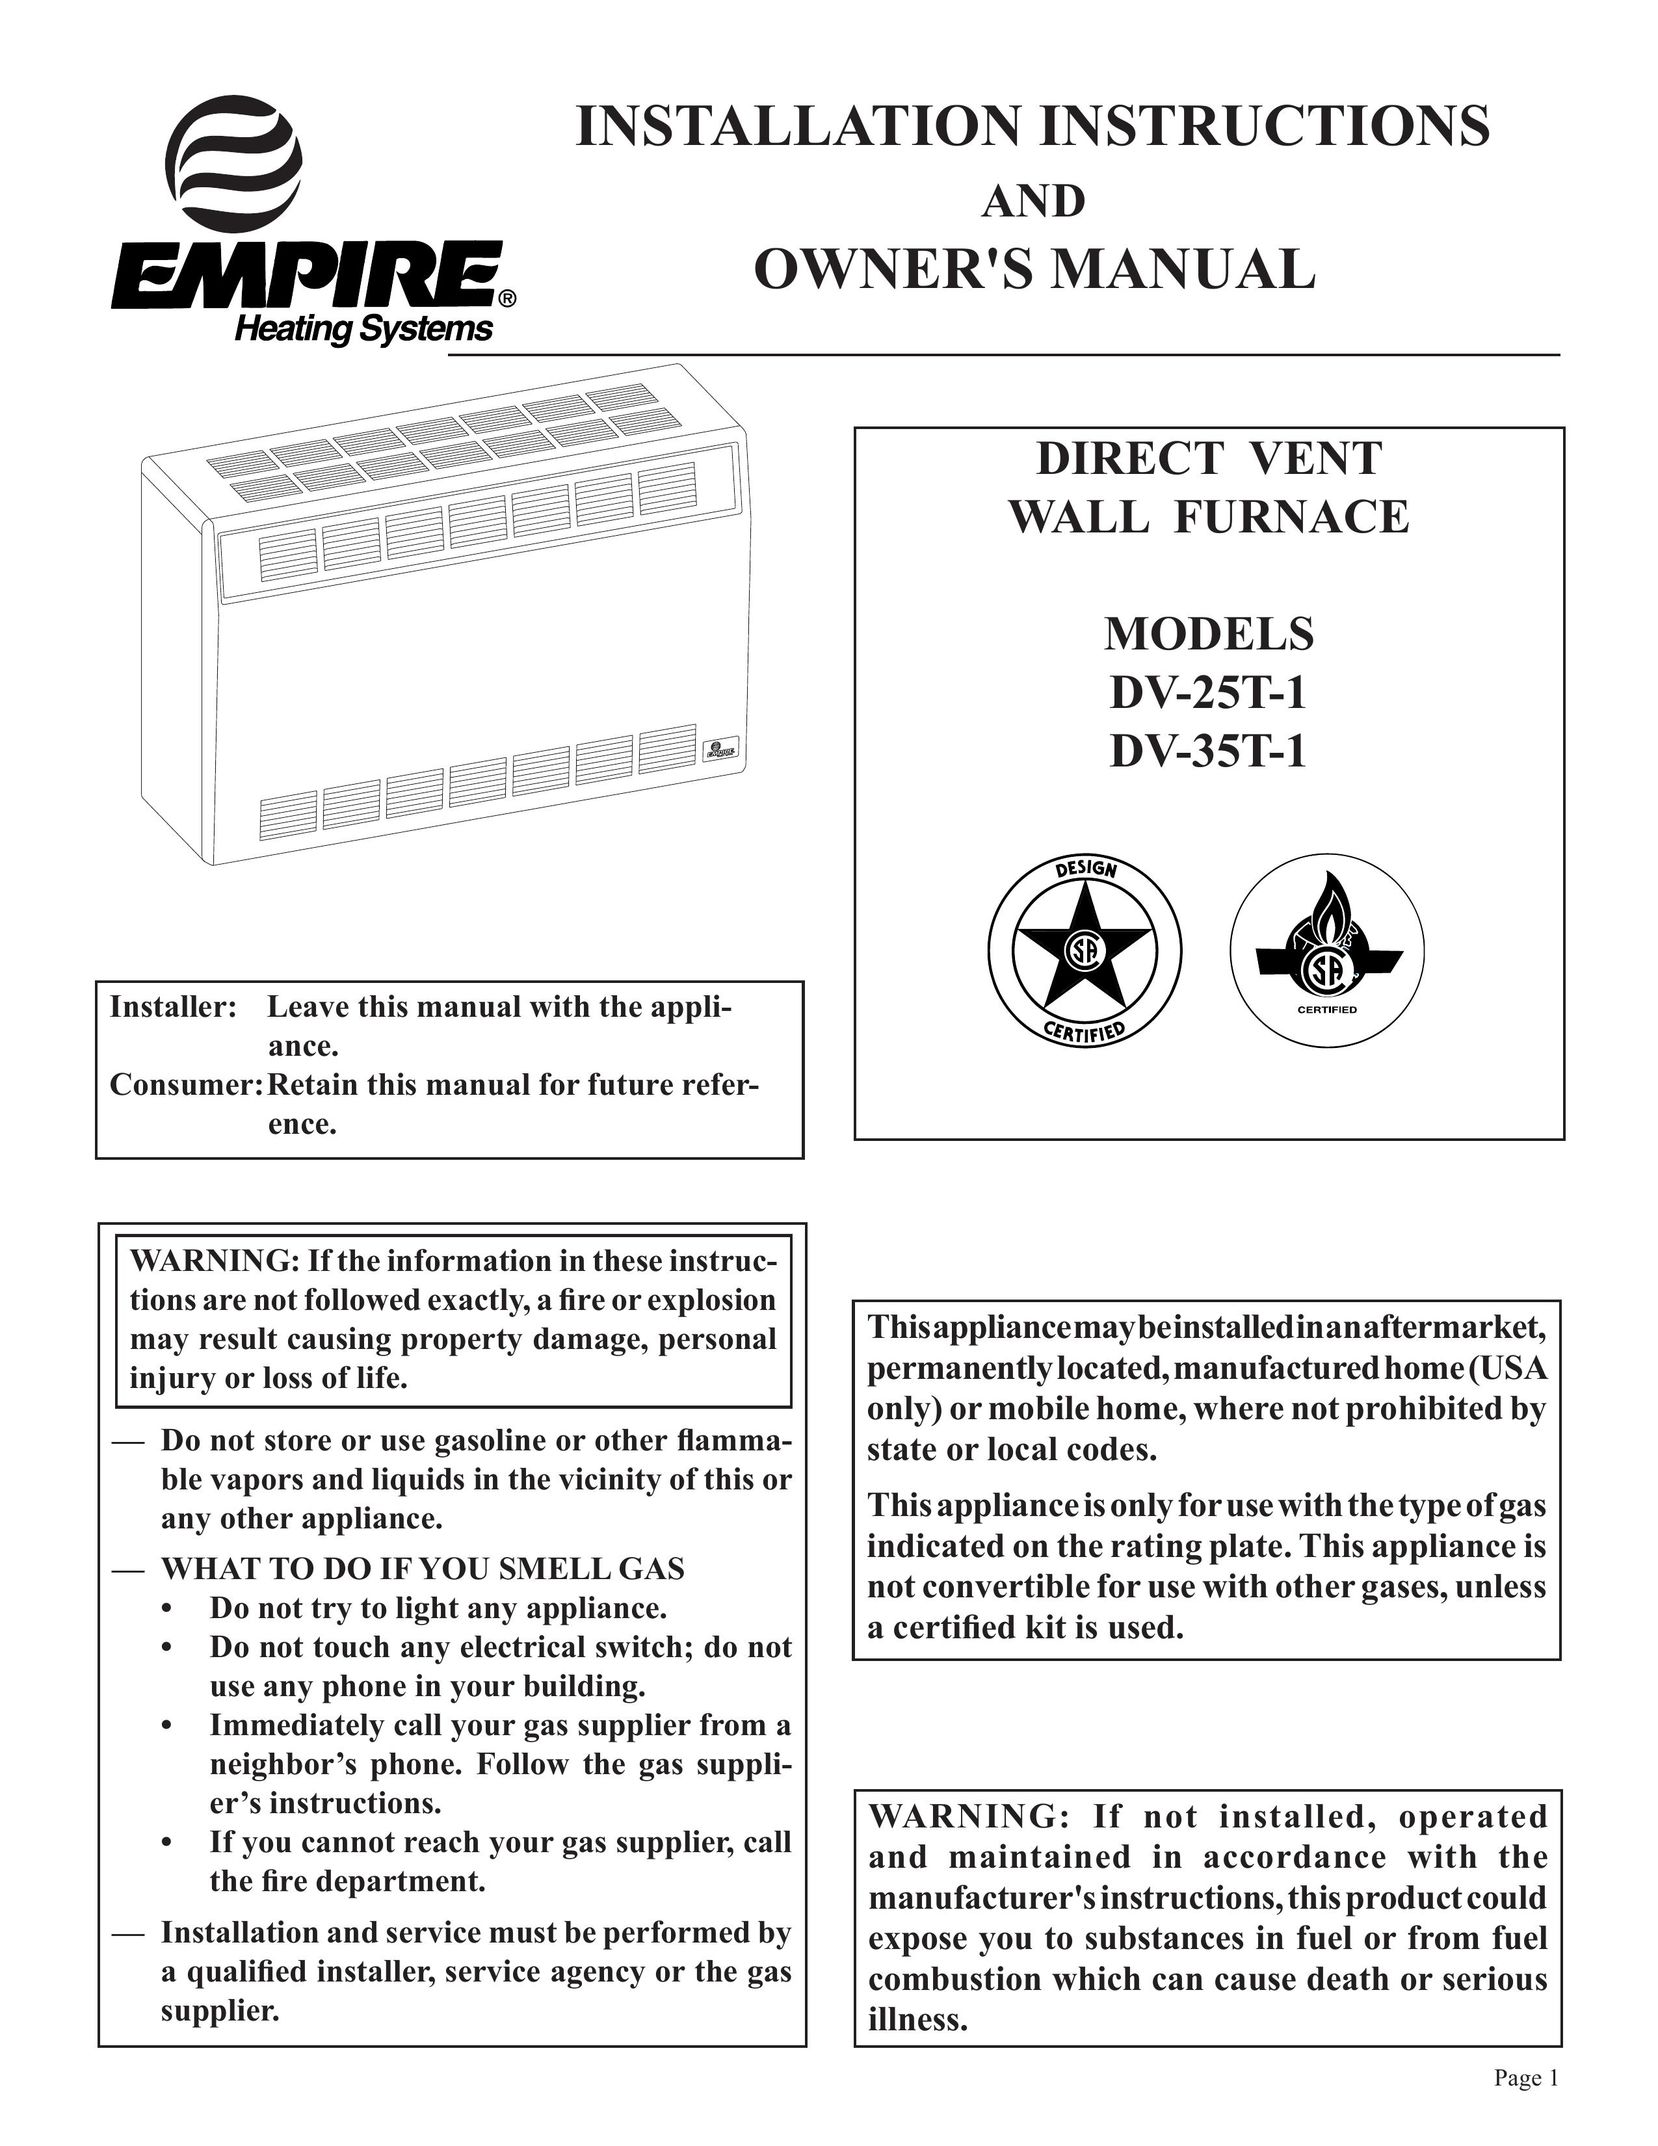 Empire Products DV-25T-1 Furnace User Manual